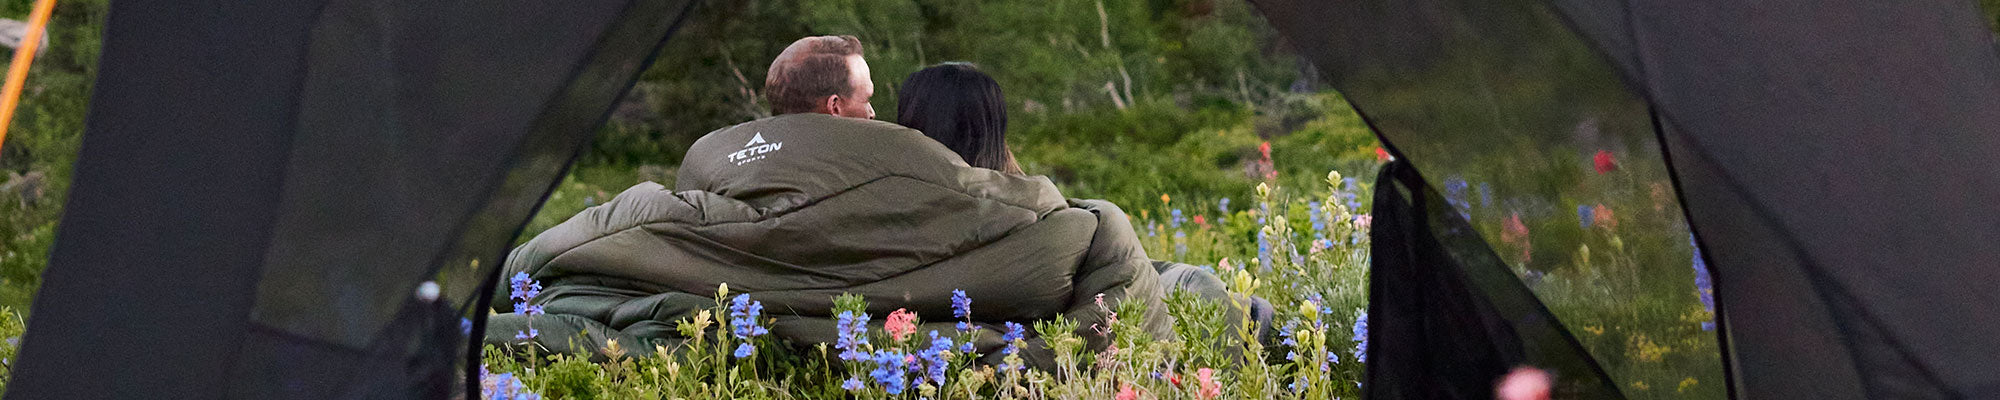 A man and a woman are seen through the open tent doors sitting in a field of wildflowers and snuggling up in their Mammoth sleeping bag.